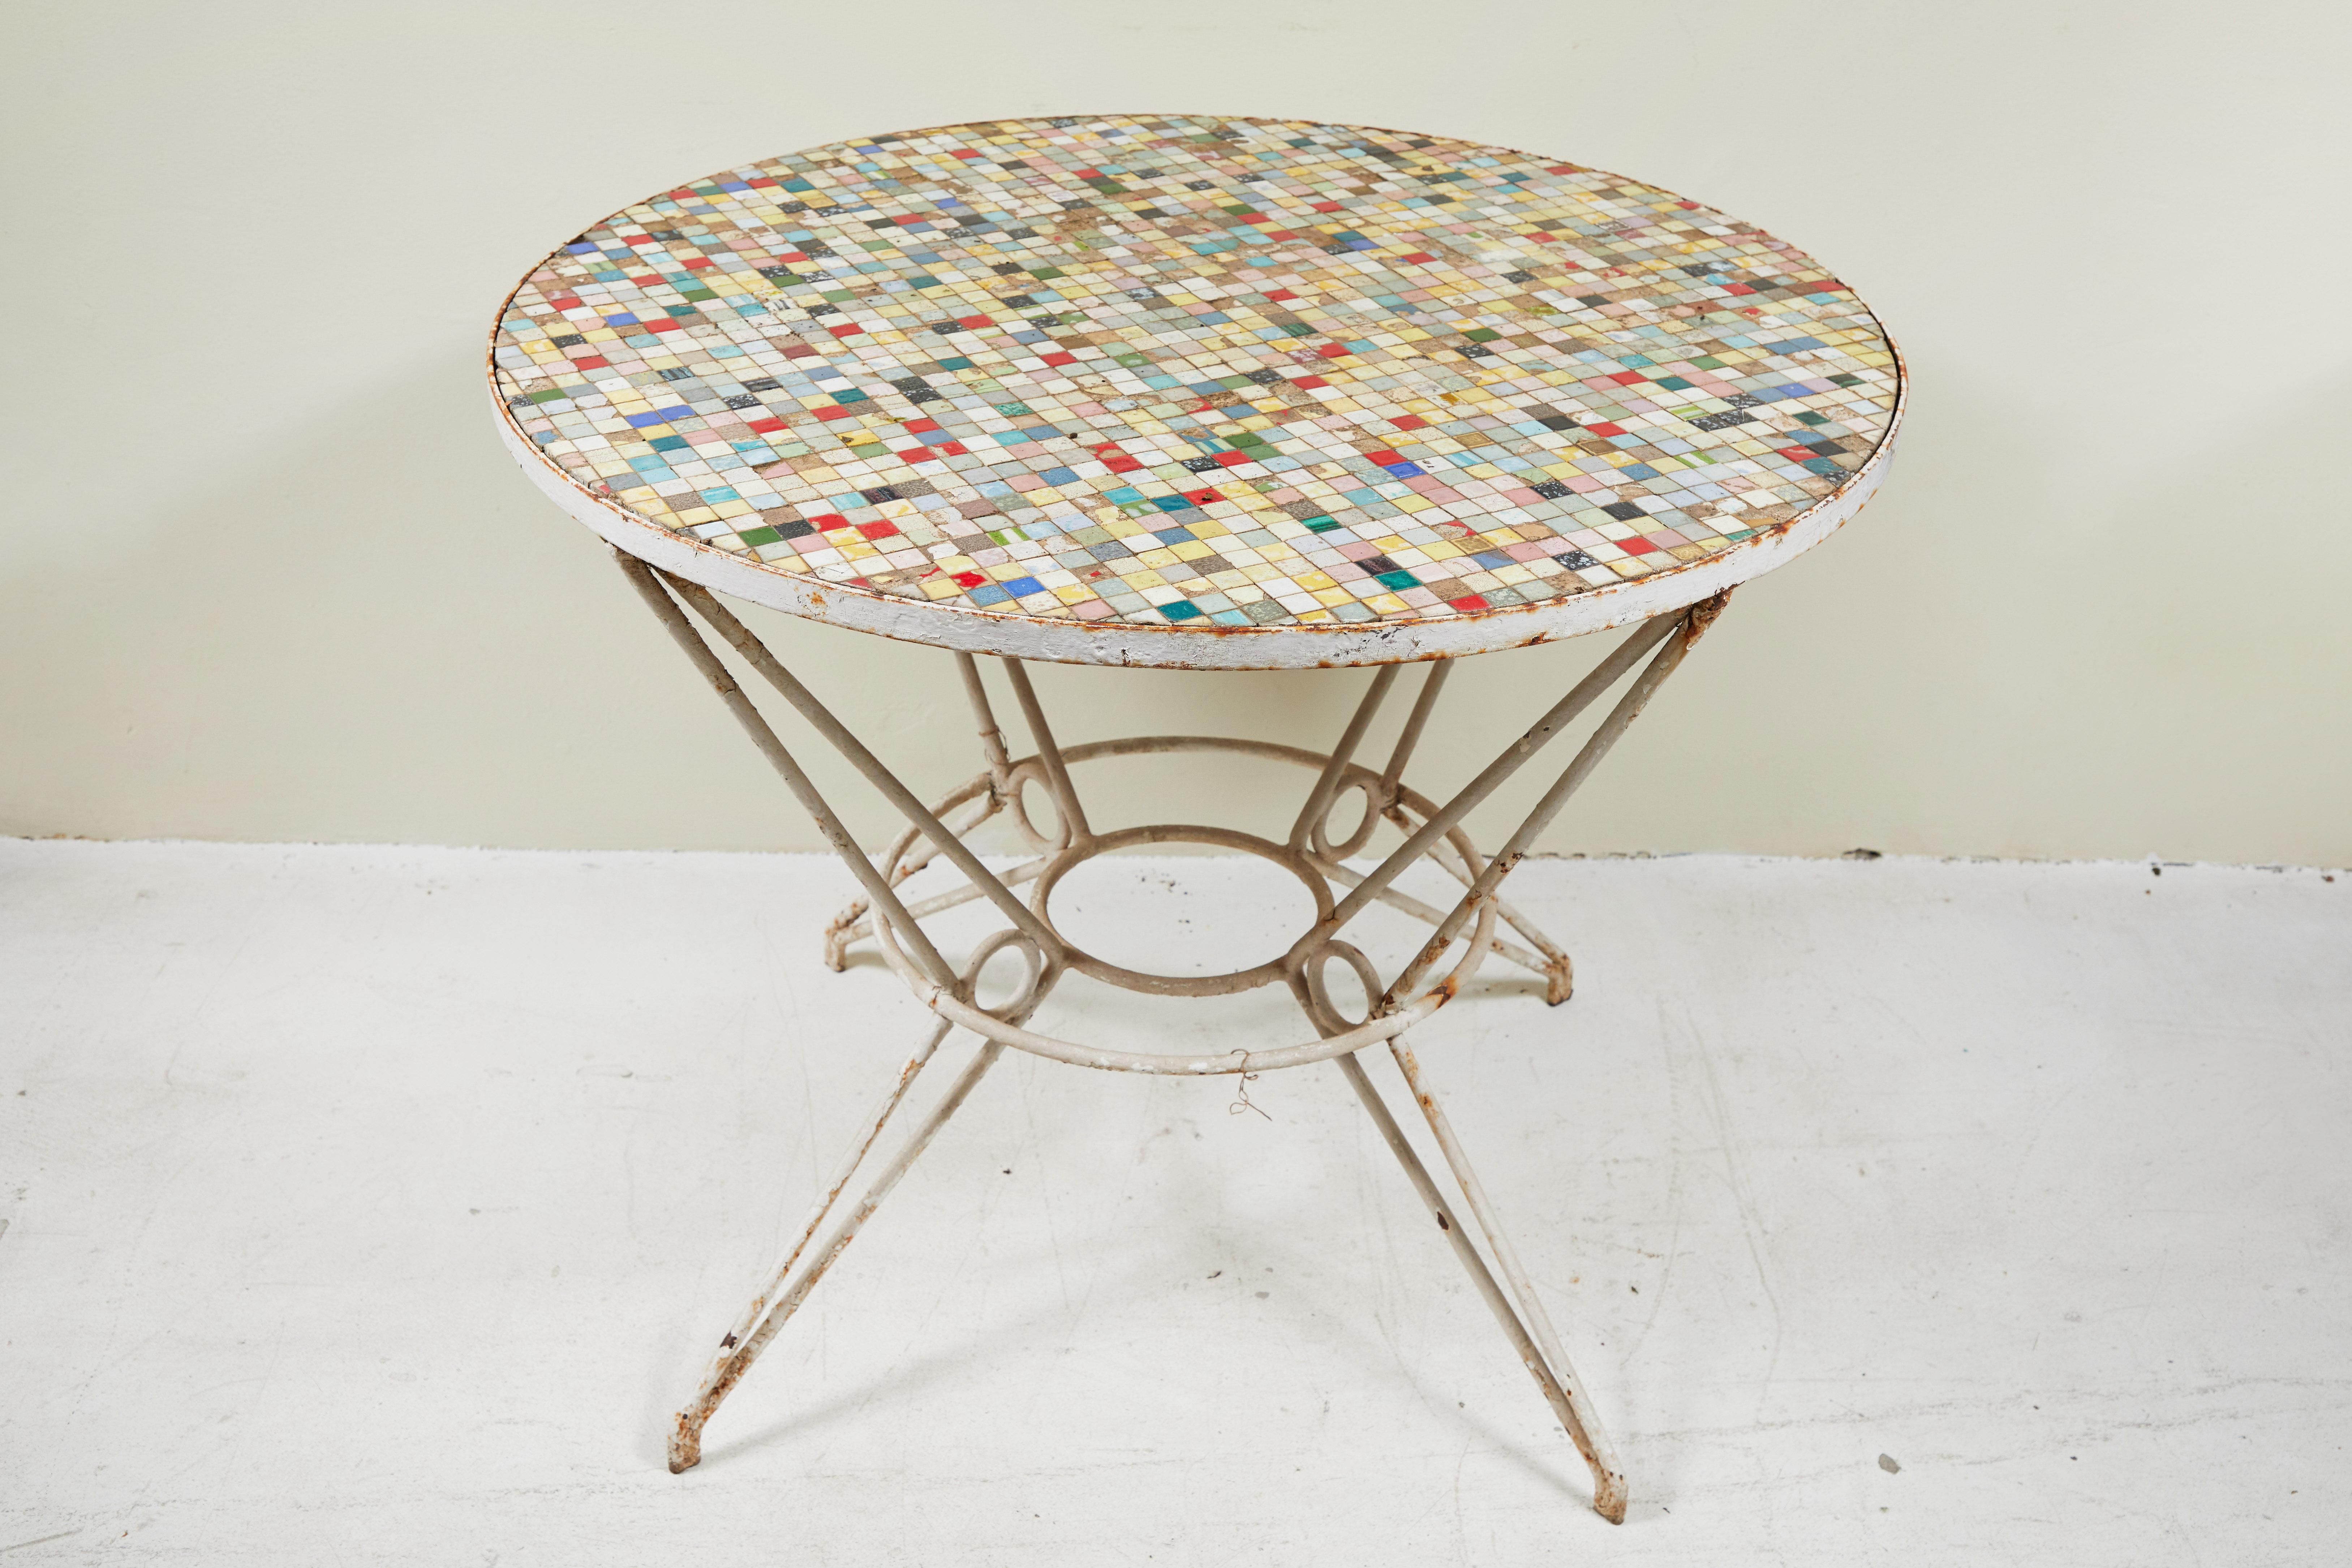 Late 20th Century Multicolored Tile Table